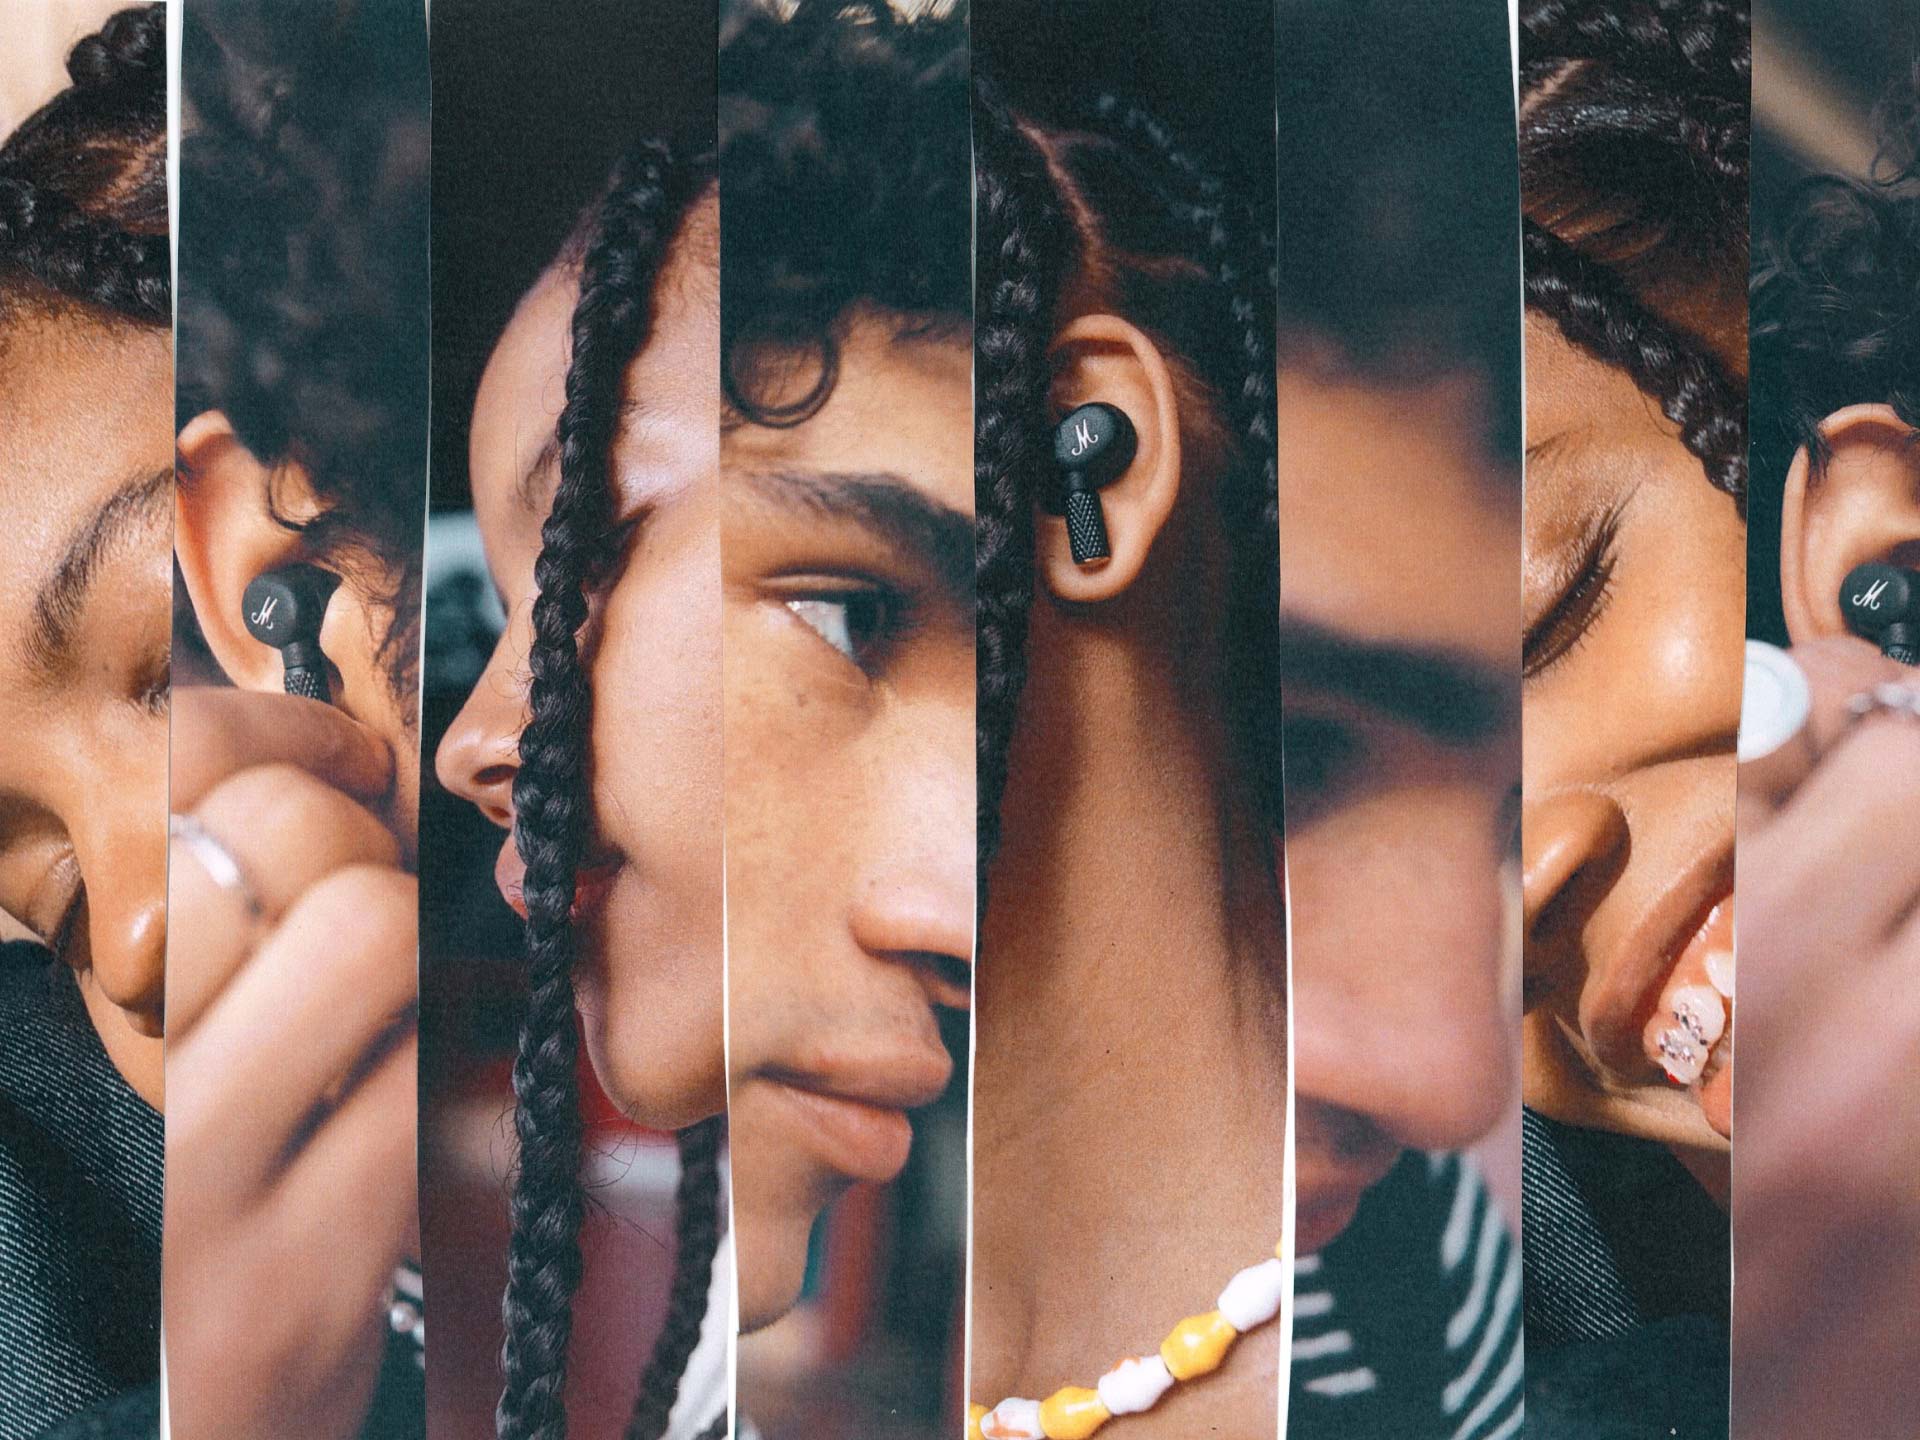 Four pictures of a woman with braids on her hair listening music on her Marshall Headphones.